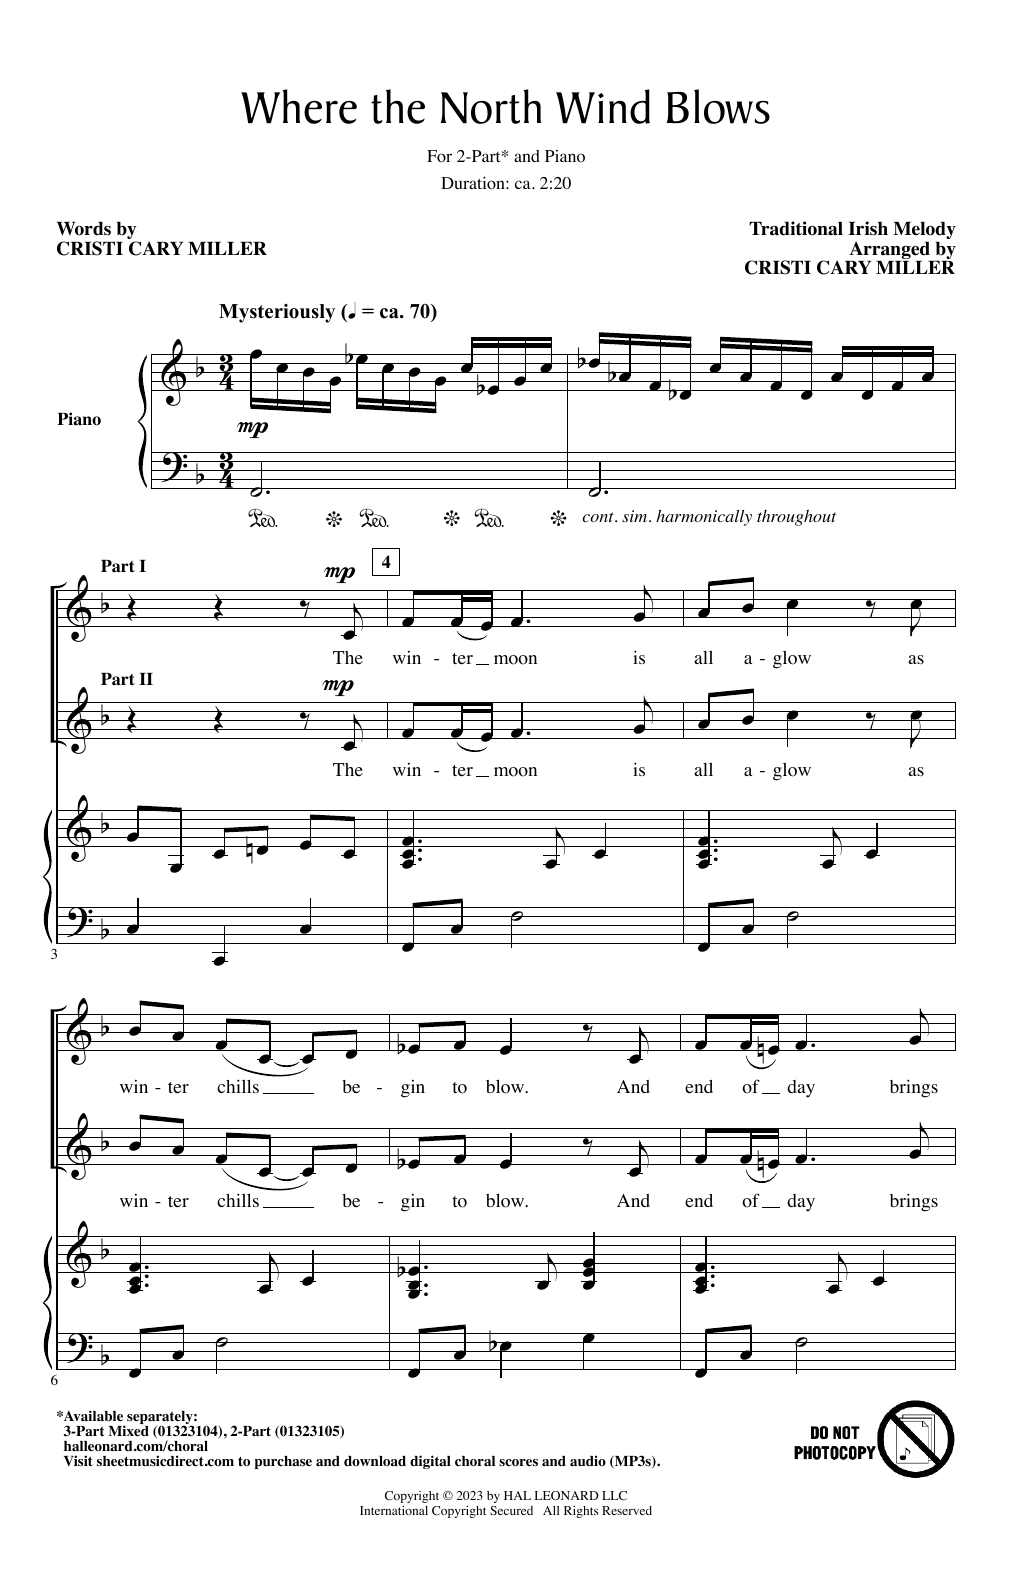 Traditional Irish Melody Where The North Wind Blows (arr. Cristi Cary Miller) sheet music notes printable PDF score